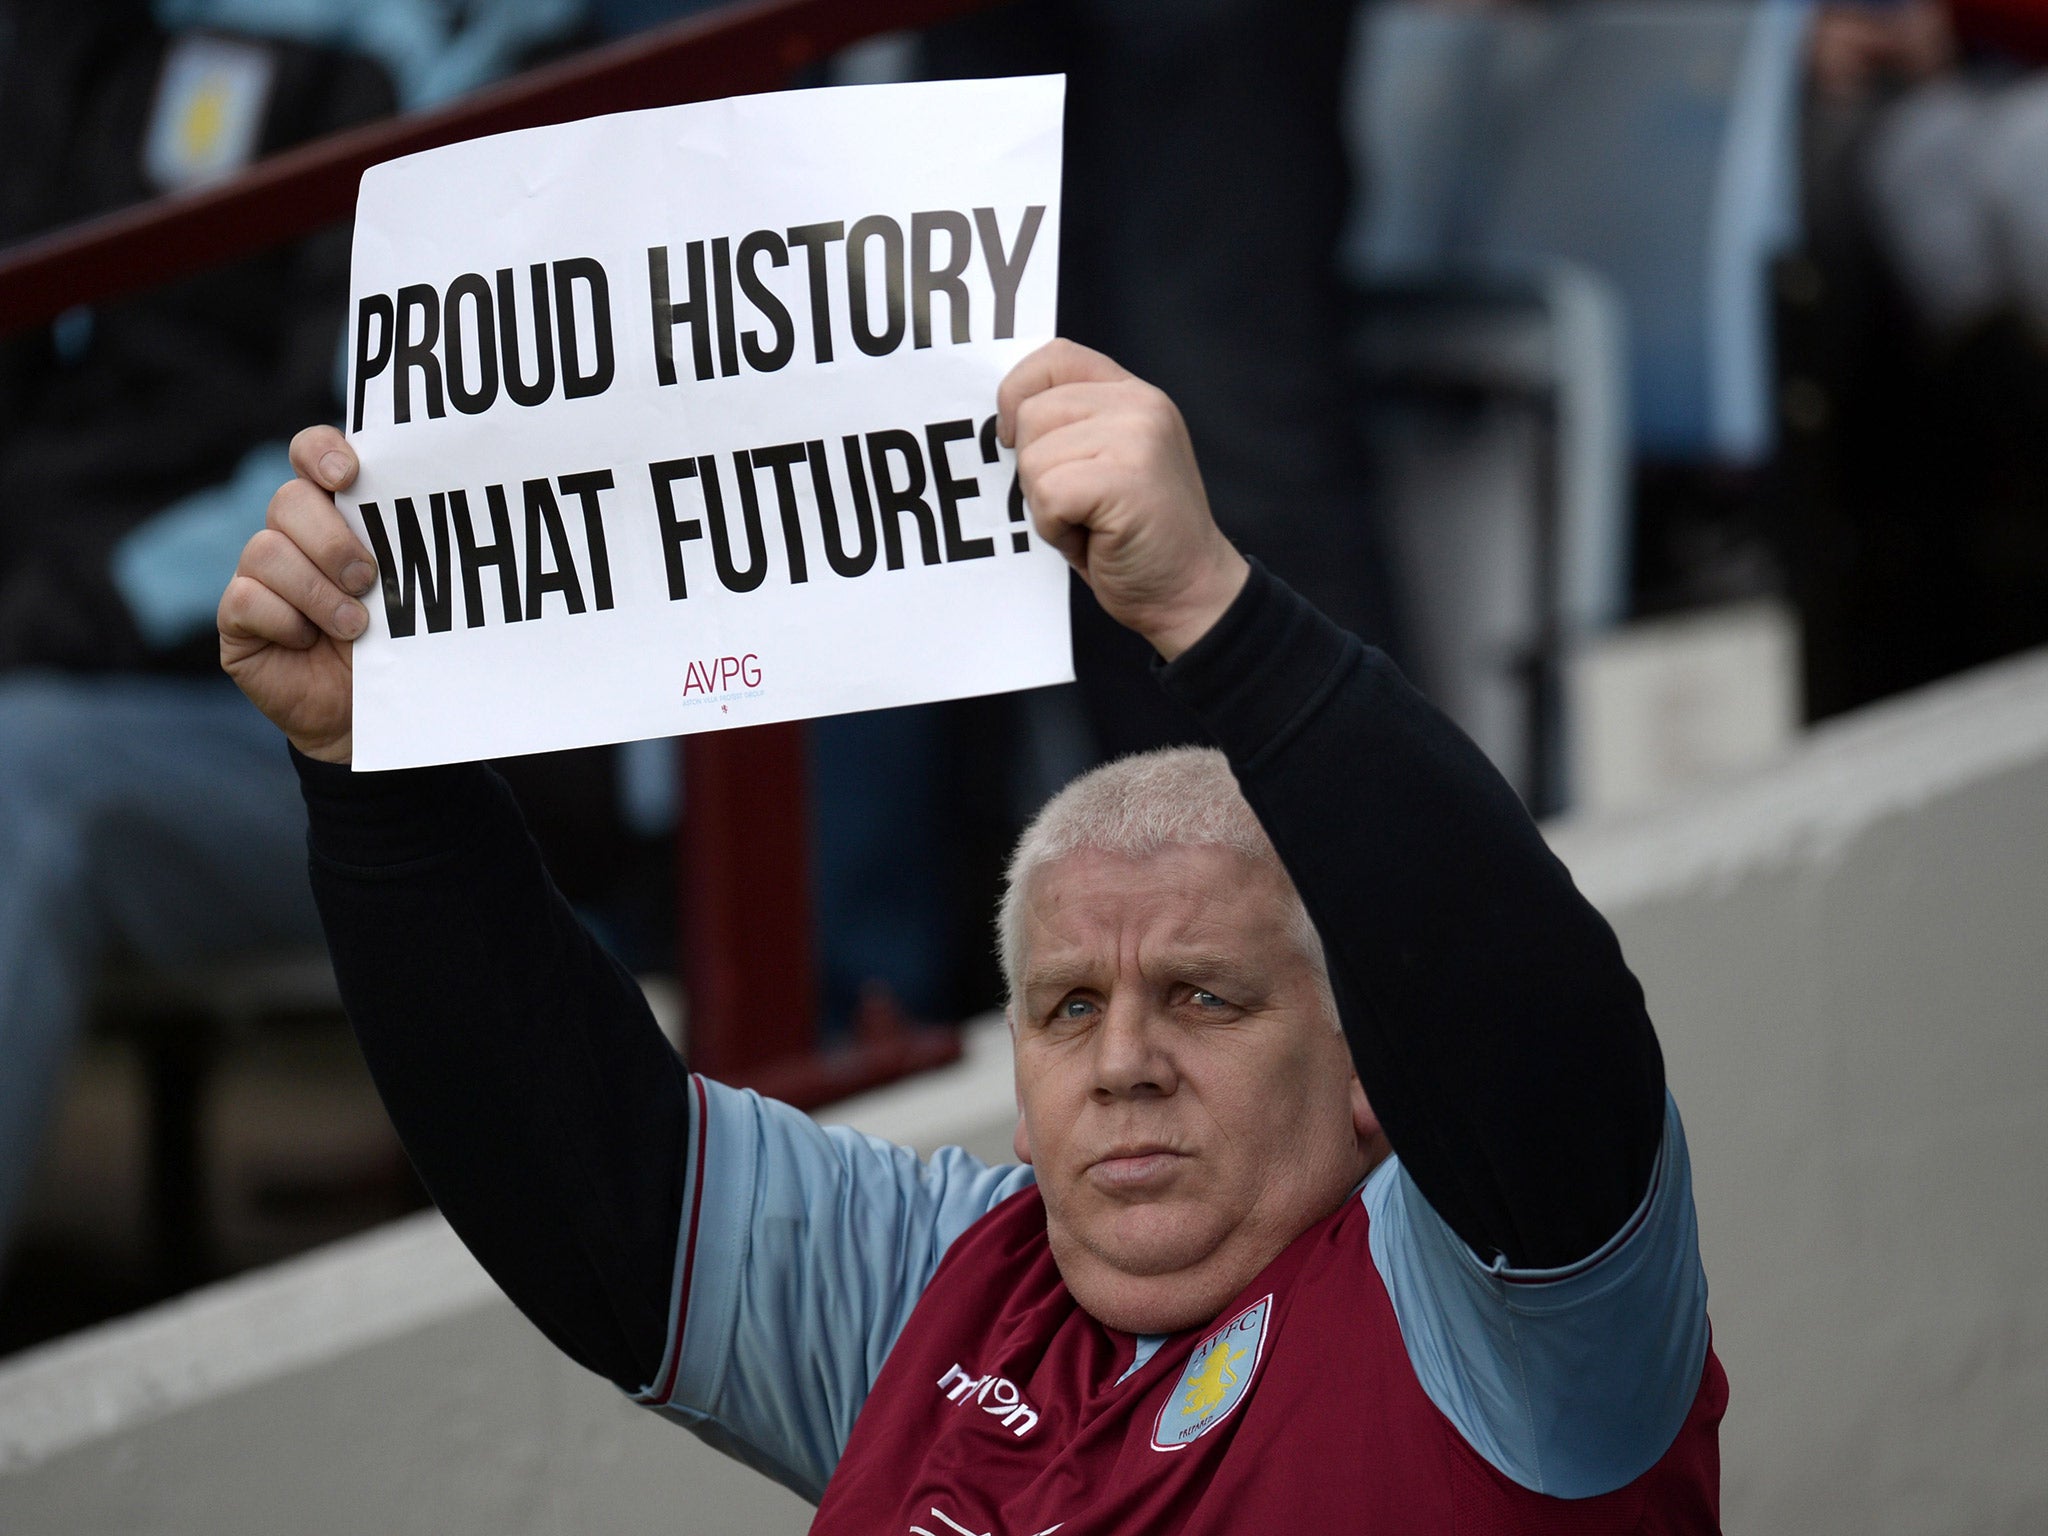 An Aston Villa fan protests ahead of the match with Chelsea